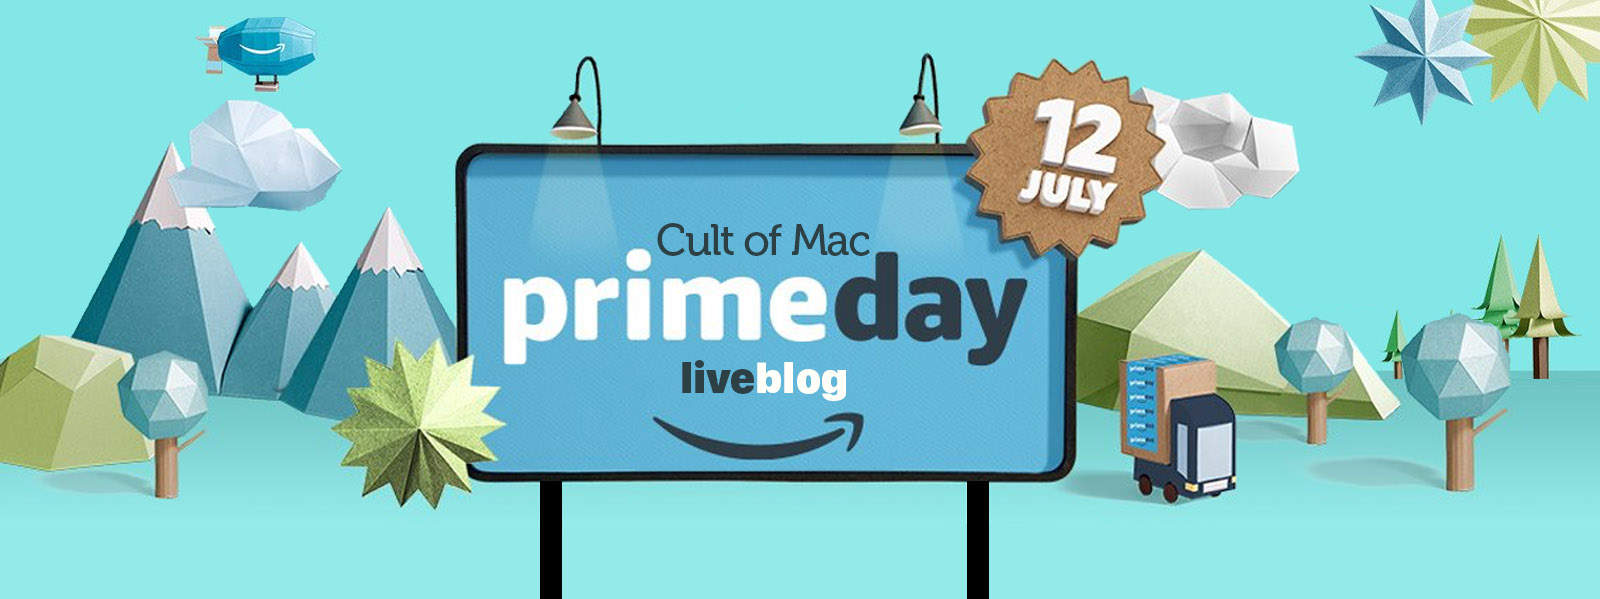 Grab Amazon Prime Day's hottest deals (while they last)